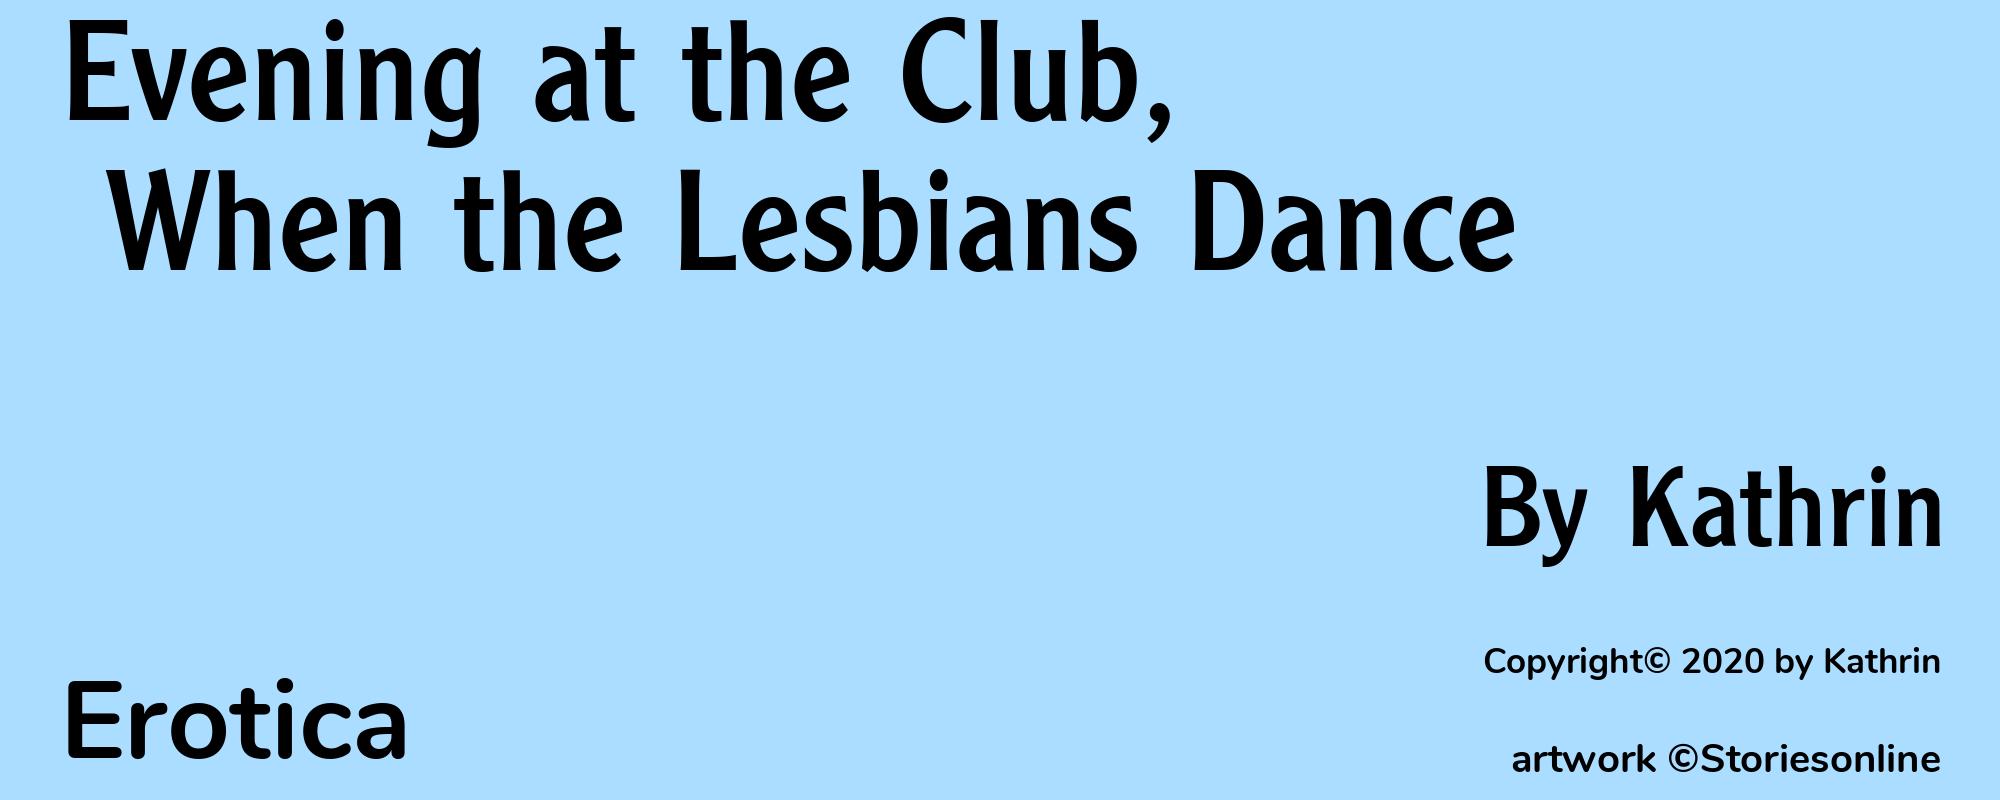 Evening at the Club, When the Lesbians Dance - Cover